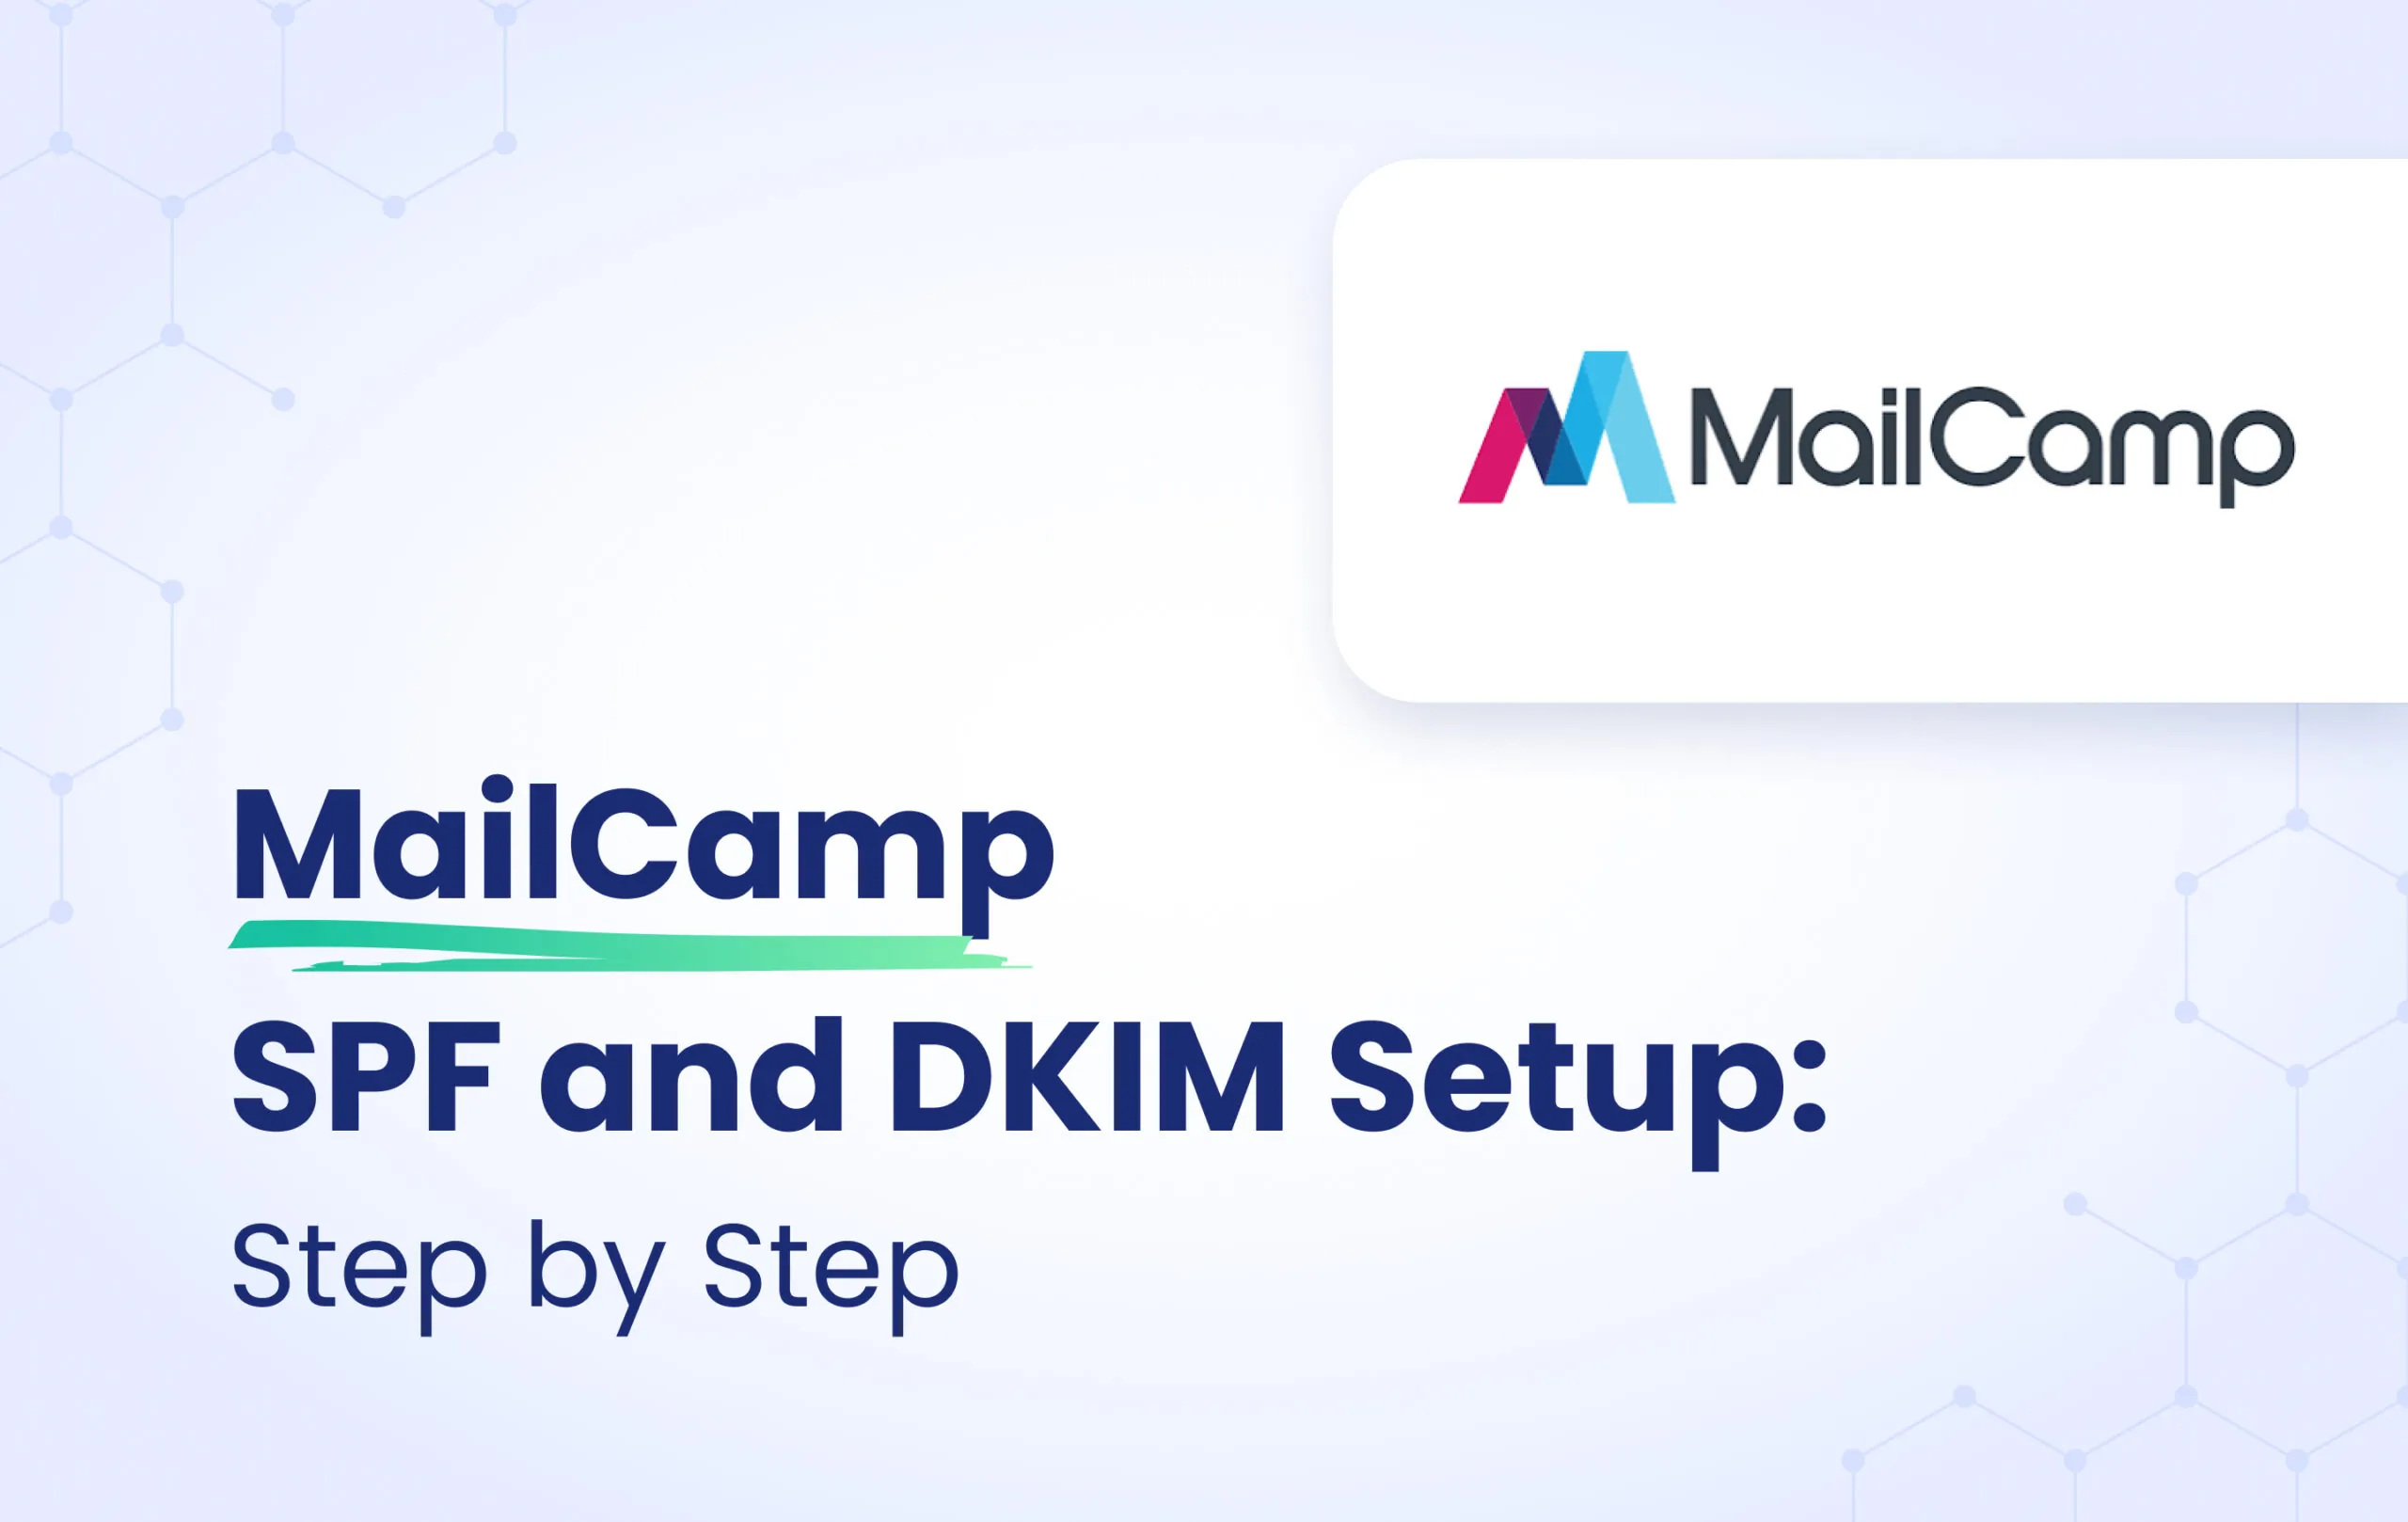 MailCamp SPF and DKIM configuration